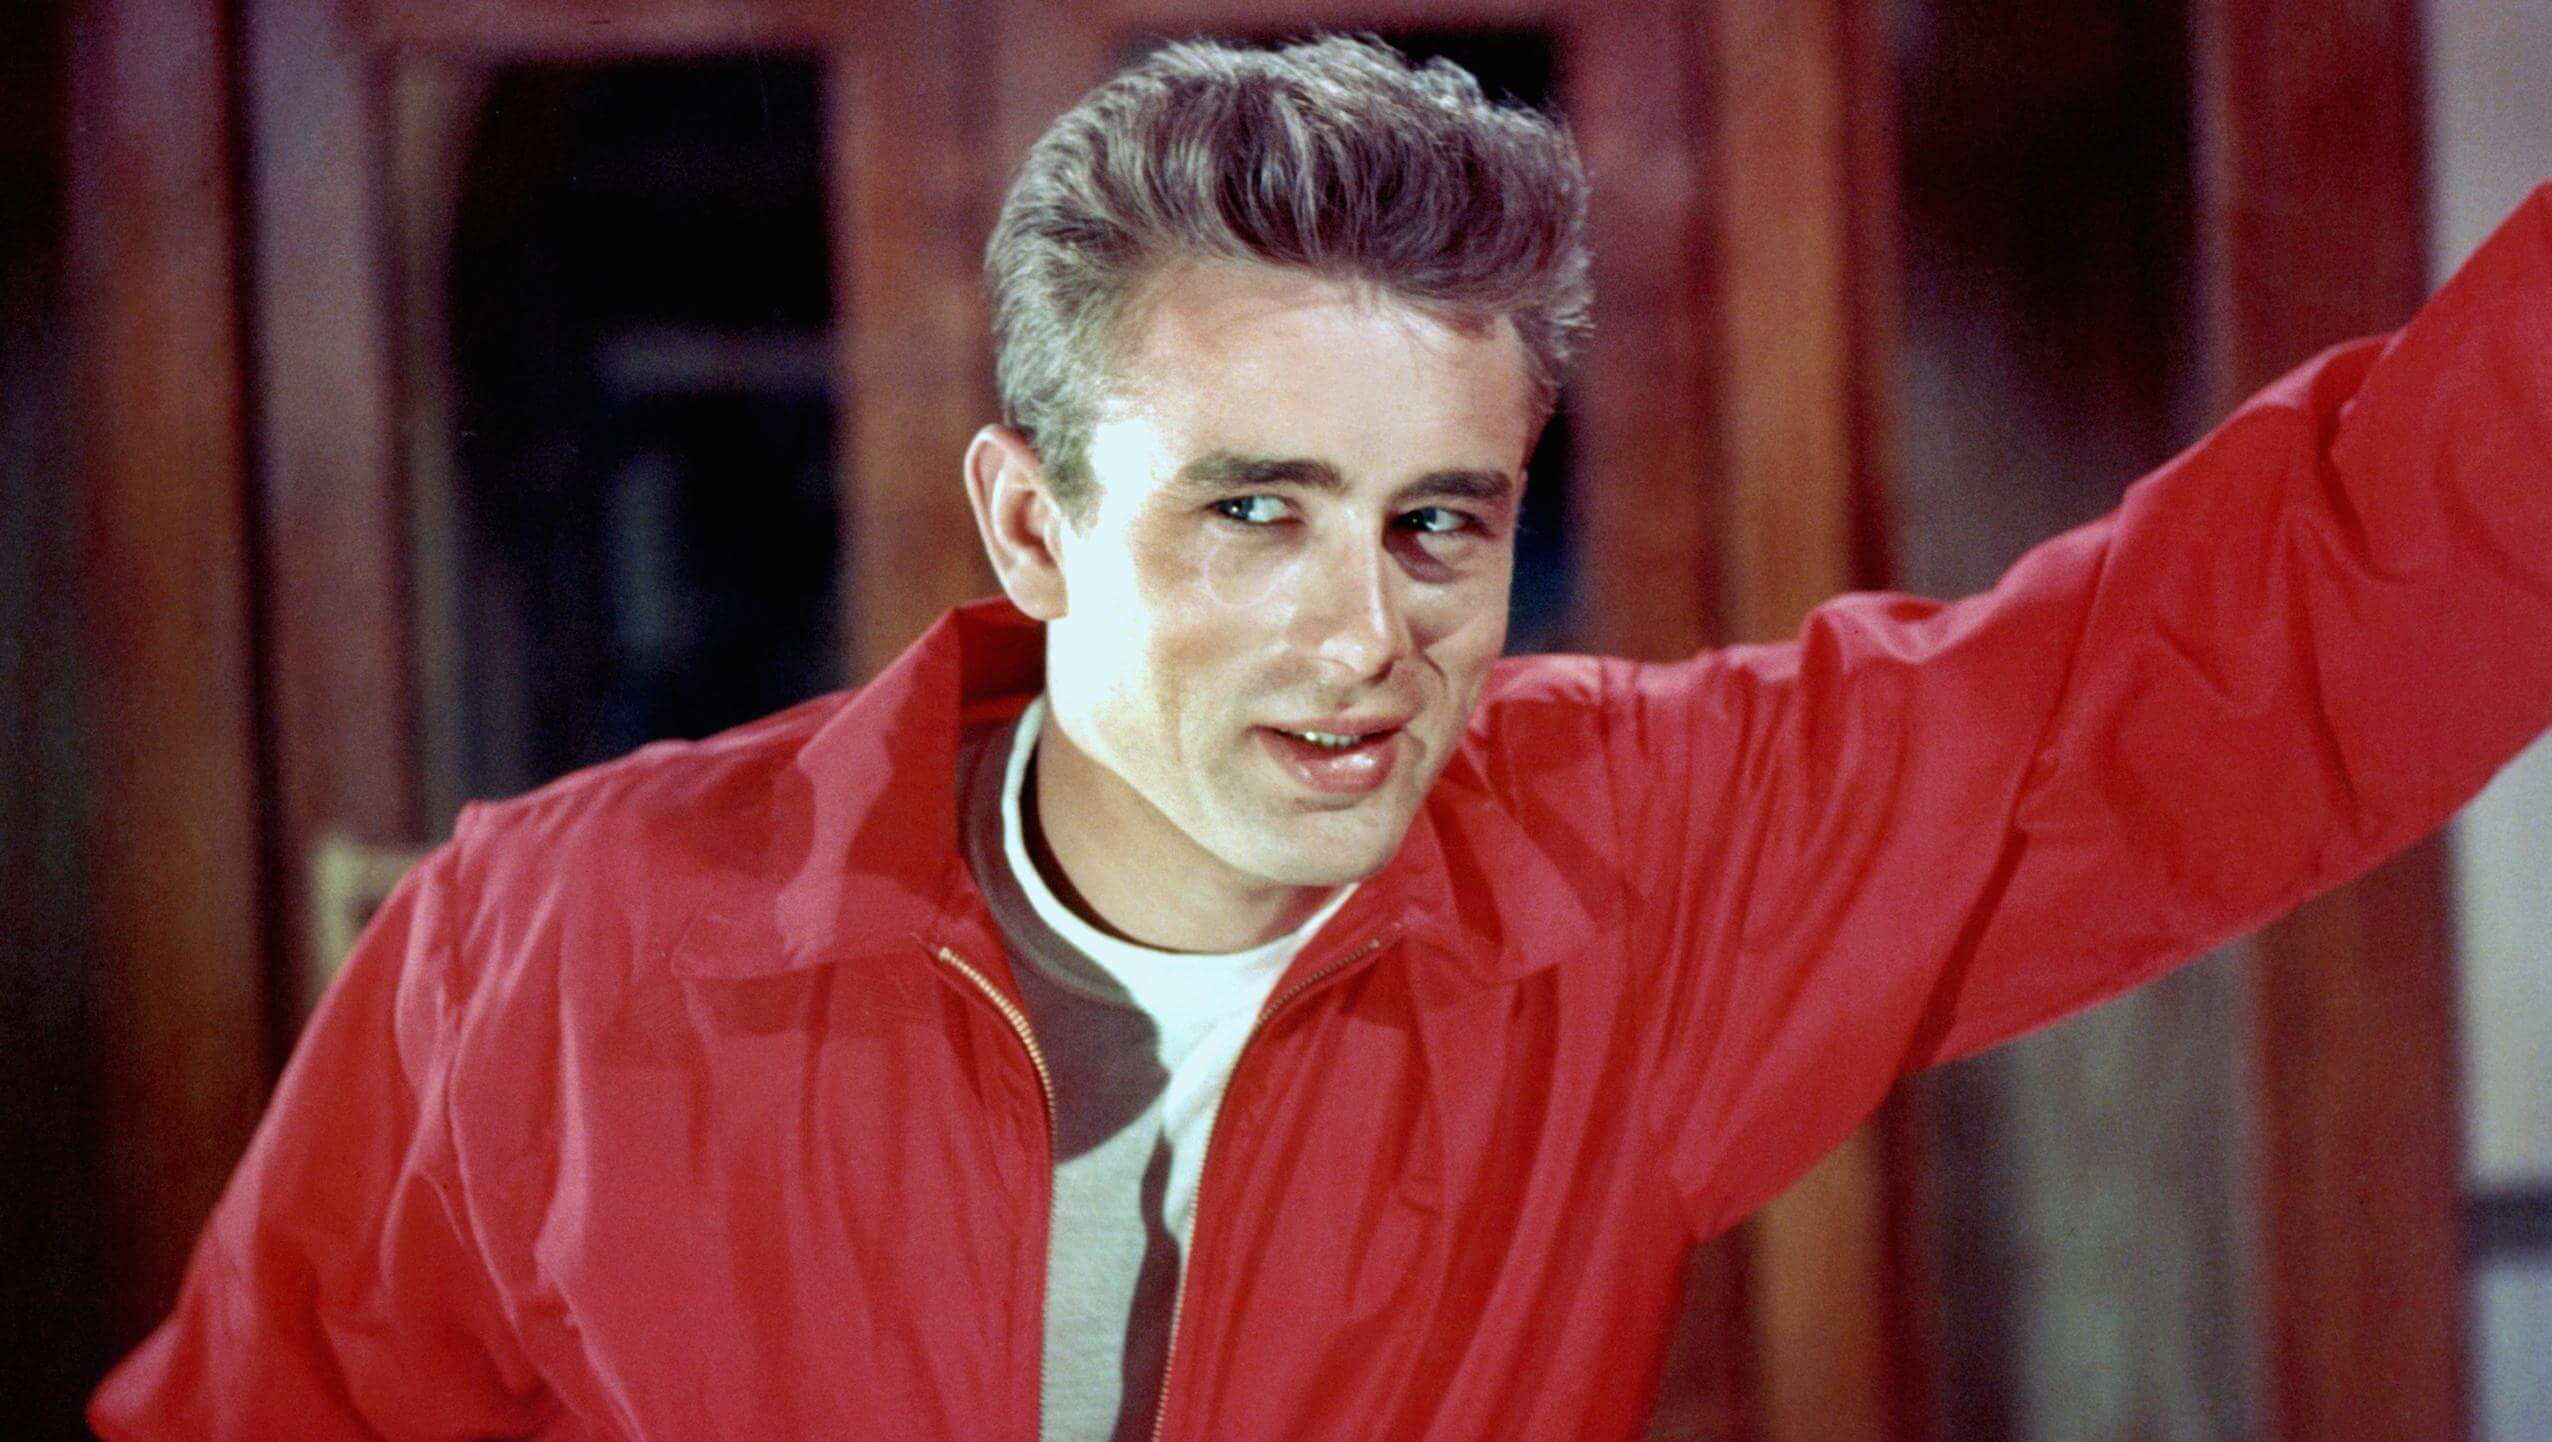 rebel-without-a-cause-1955-movie-james-dean